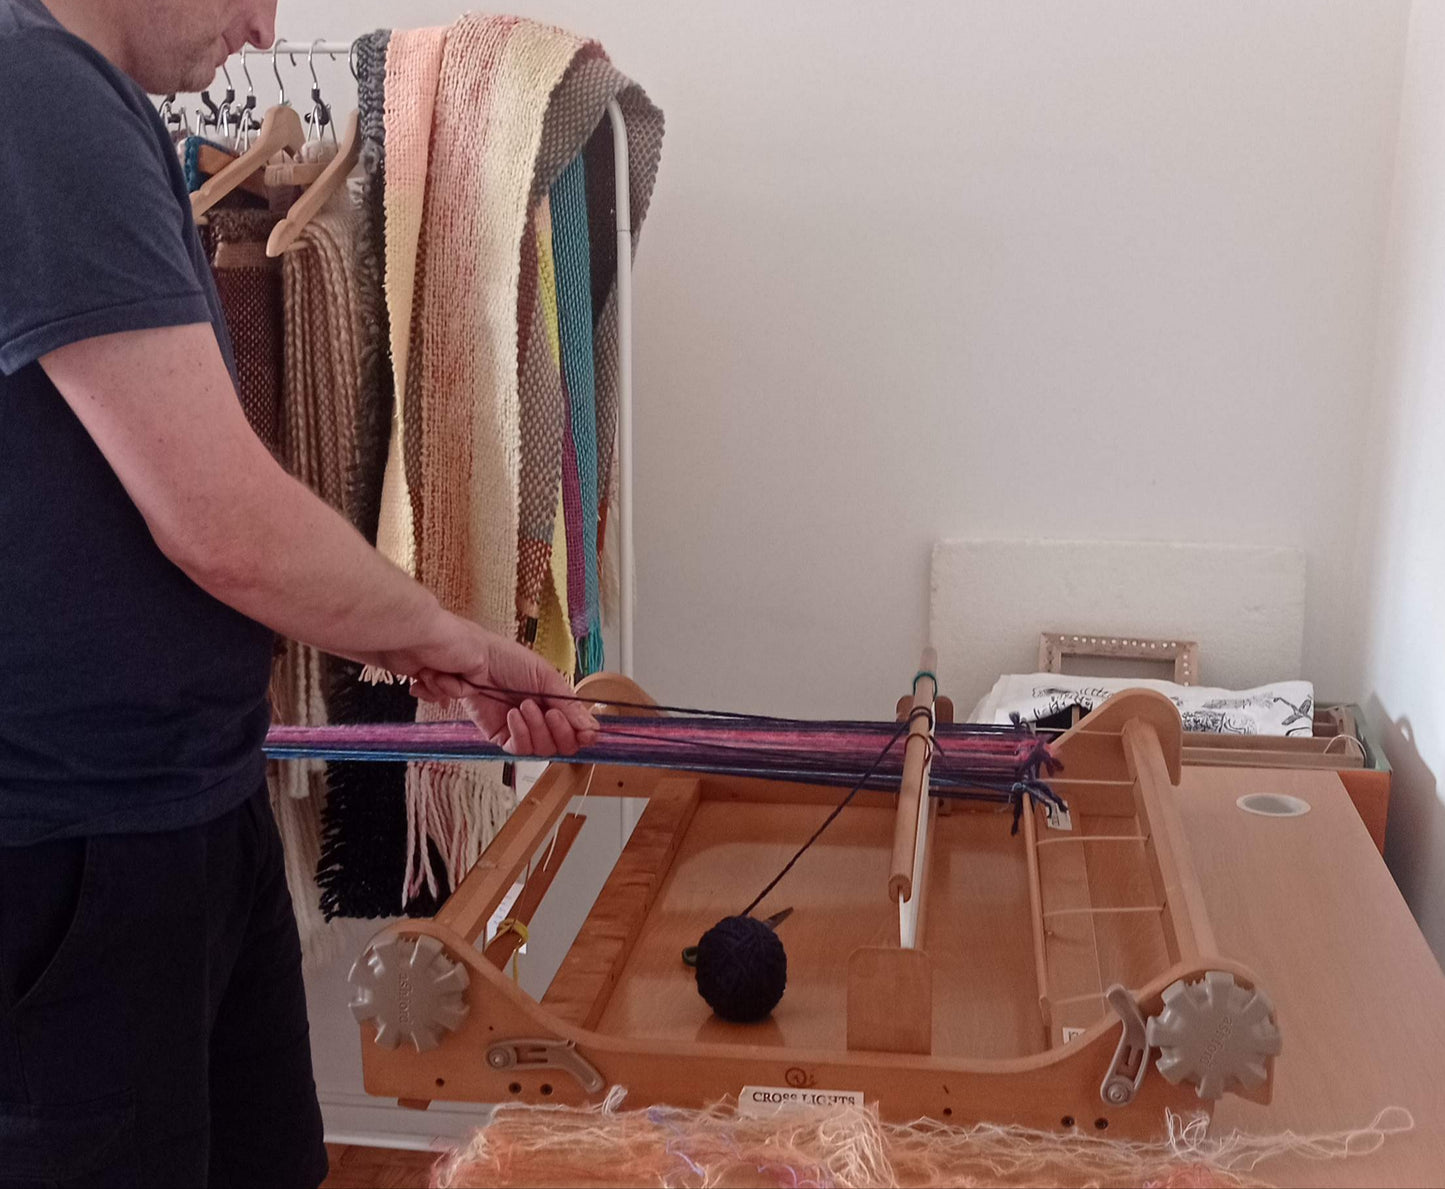 3 Days "Textile Weaving Workshop" and Homestay - in Lisbon, Portugal